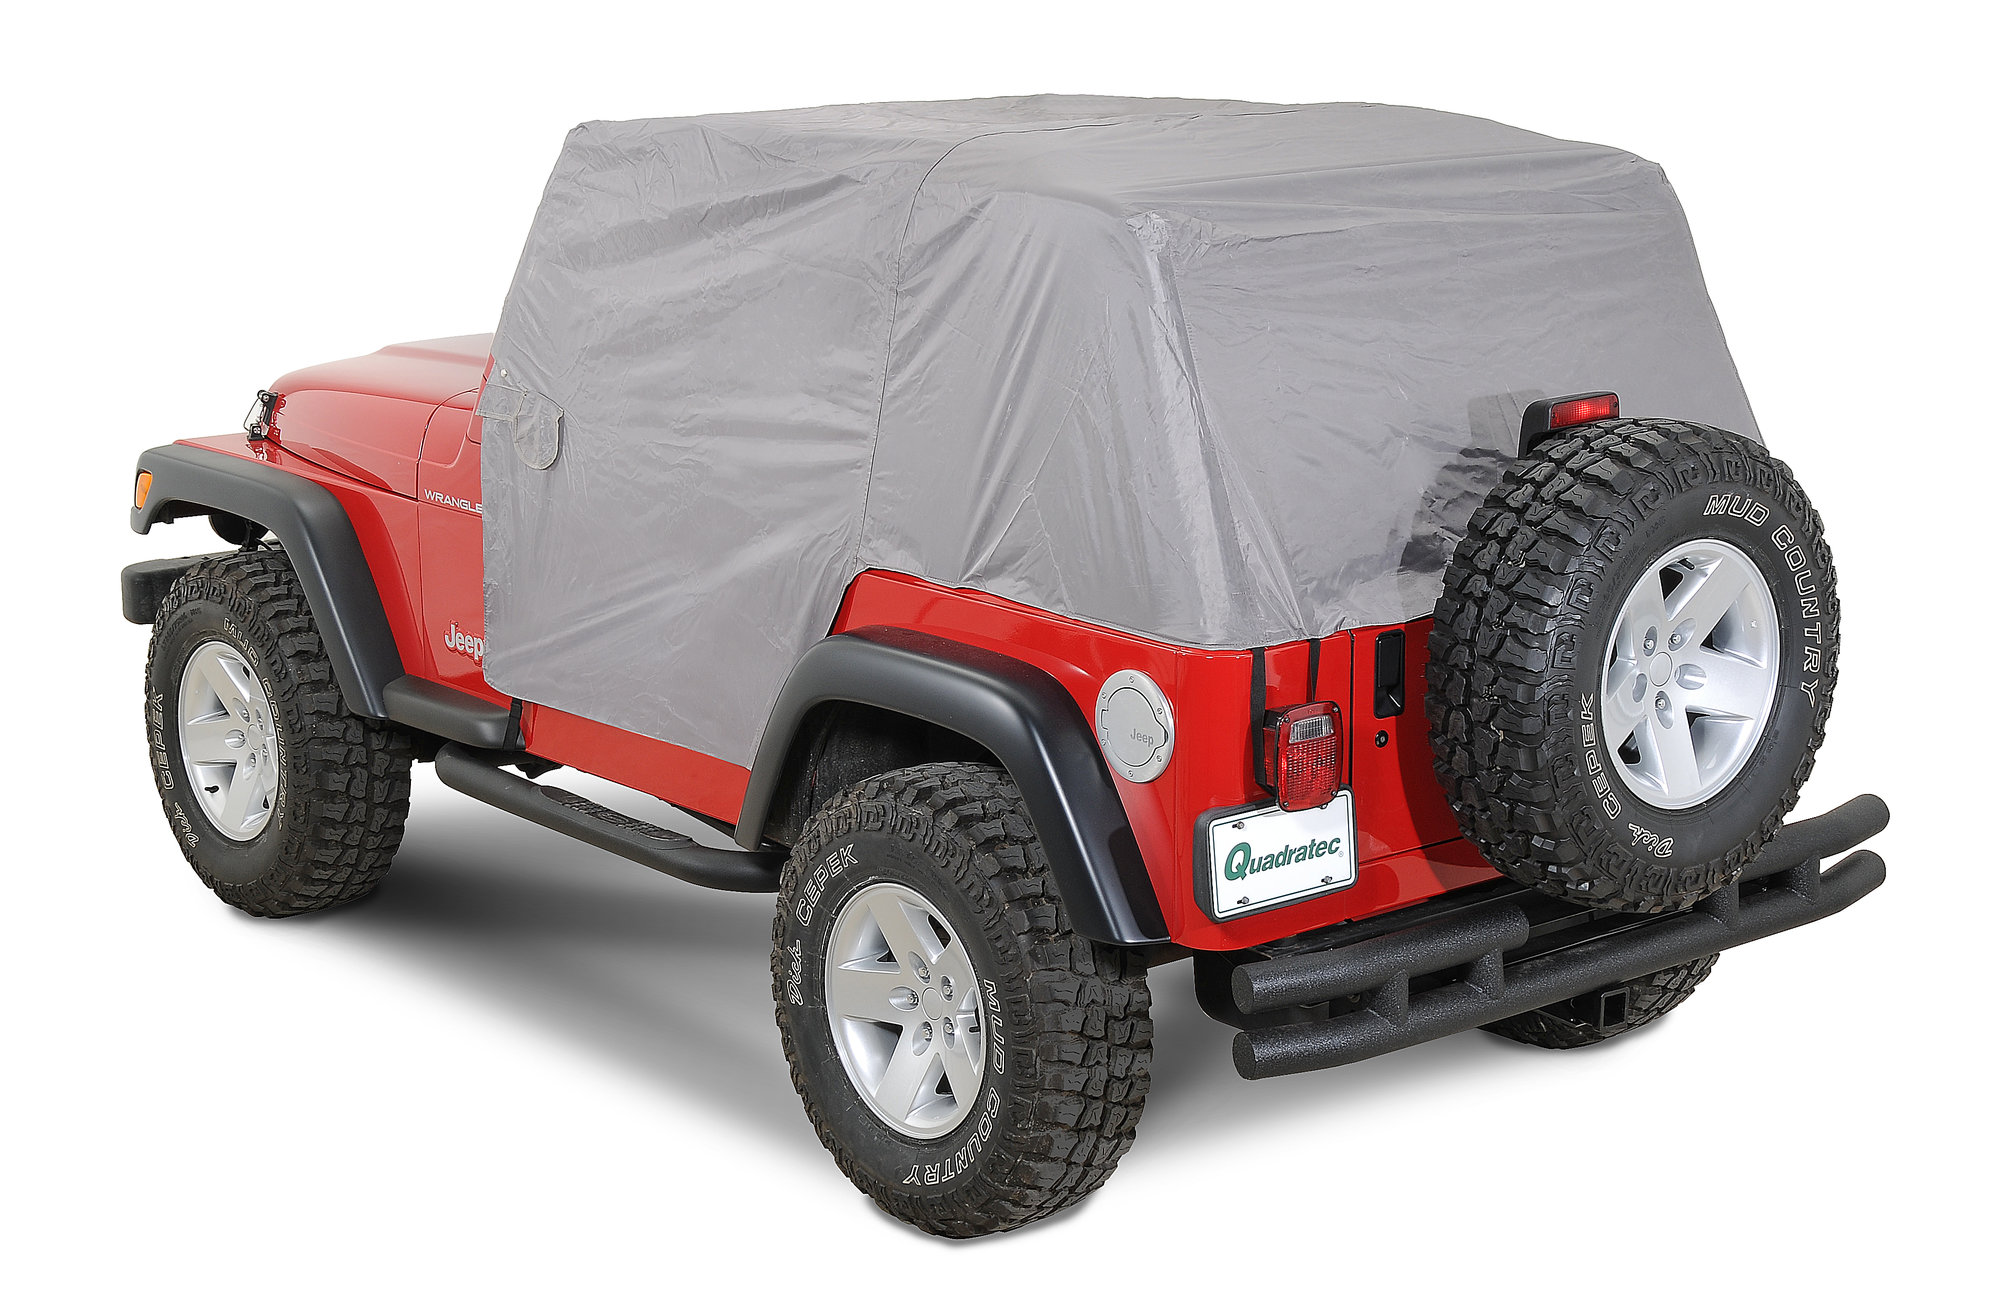 Vertically Driven Products 501161 The Full Monty Cab Cover in Gray for 9206 Jeep Wrangler YJ